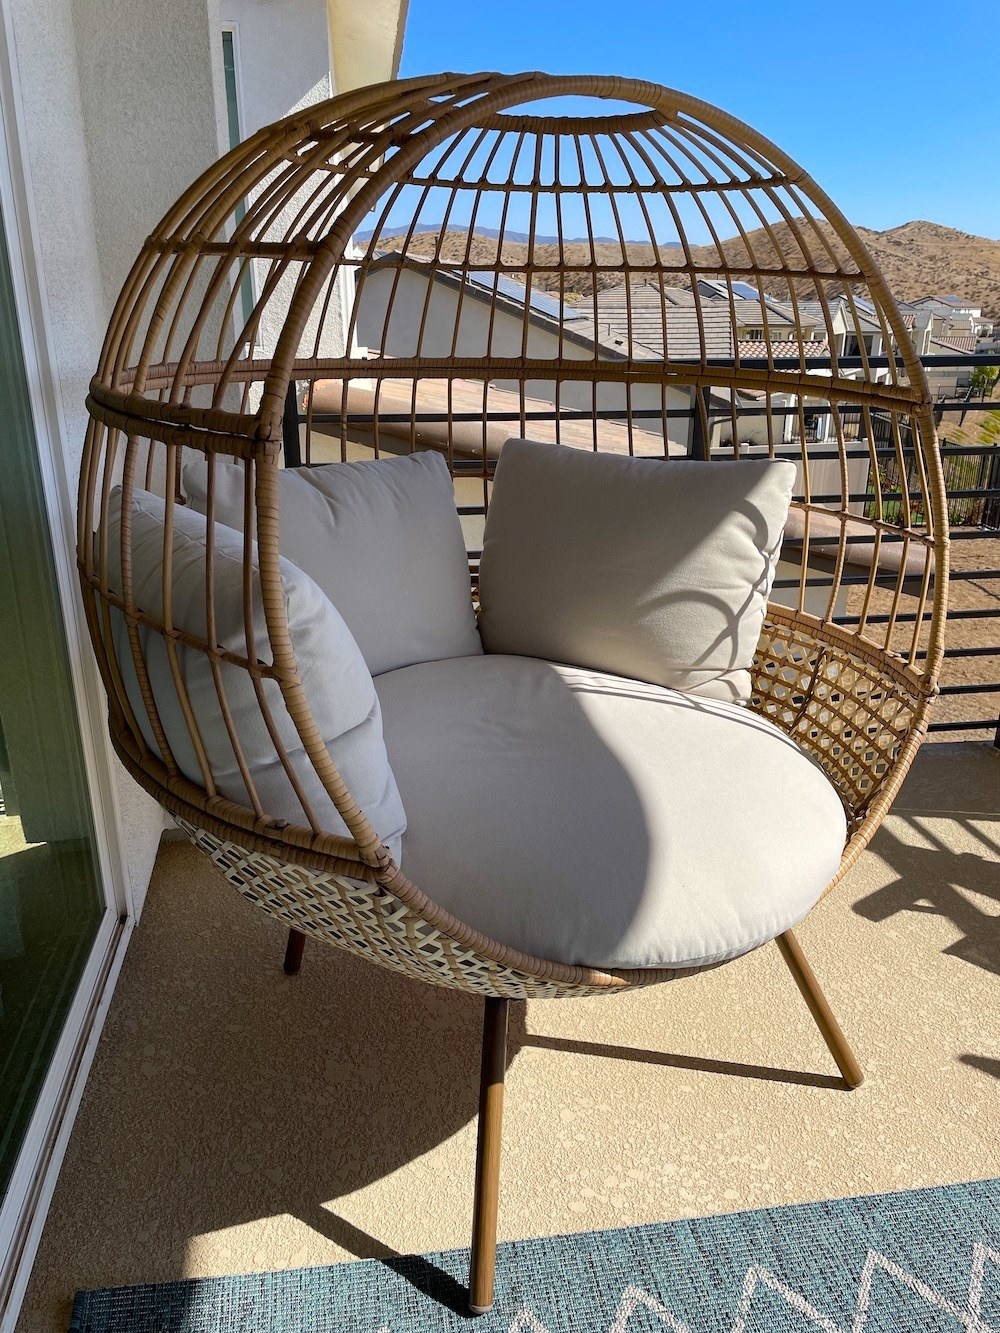 the circular woven chair with four cushions